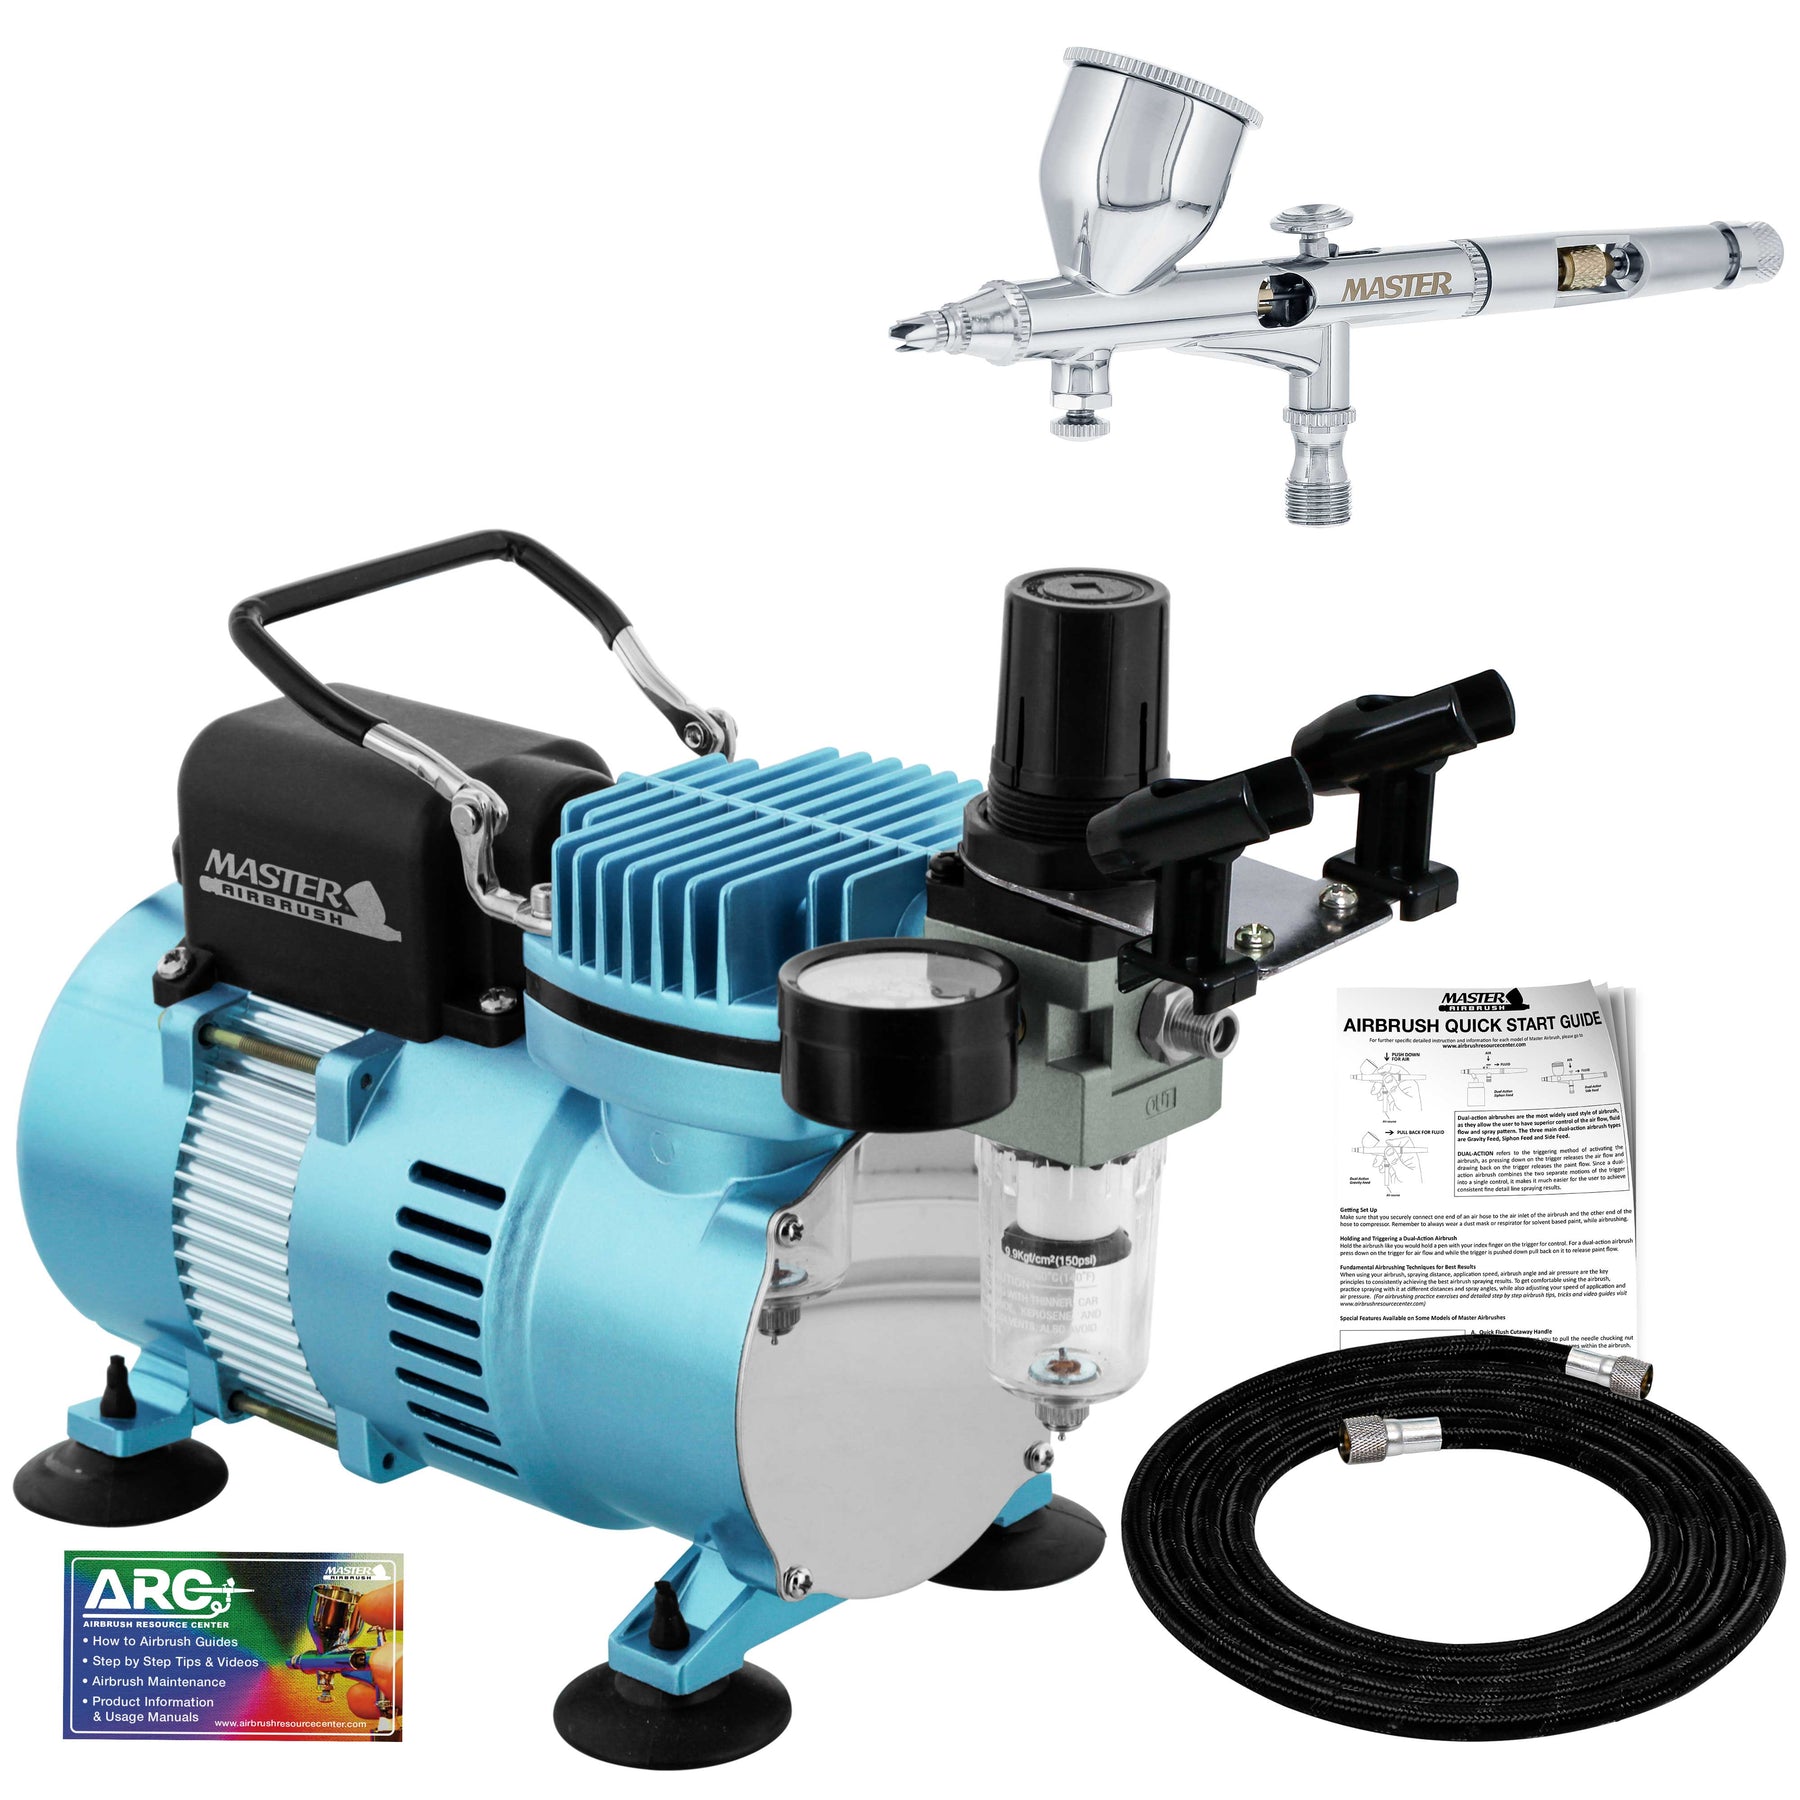 Master Airbrush Model TC-60 Super Quiet High Performance Airbrush Compressor with A 6